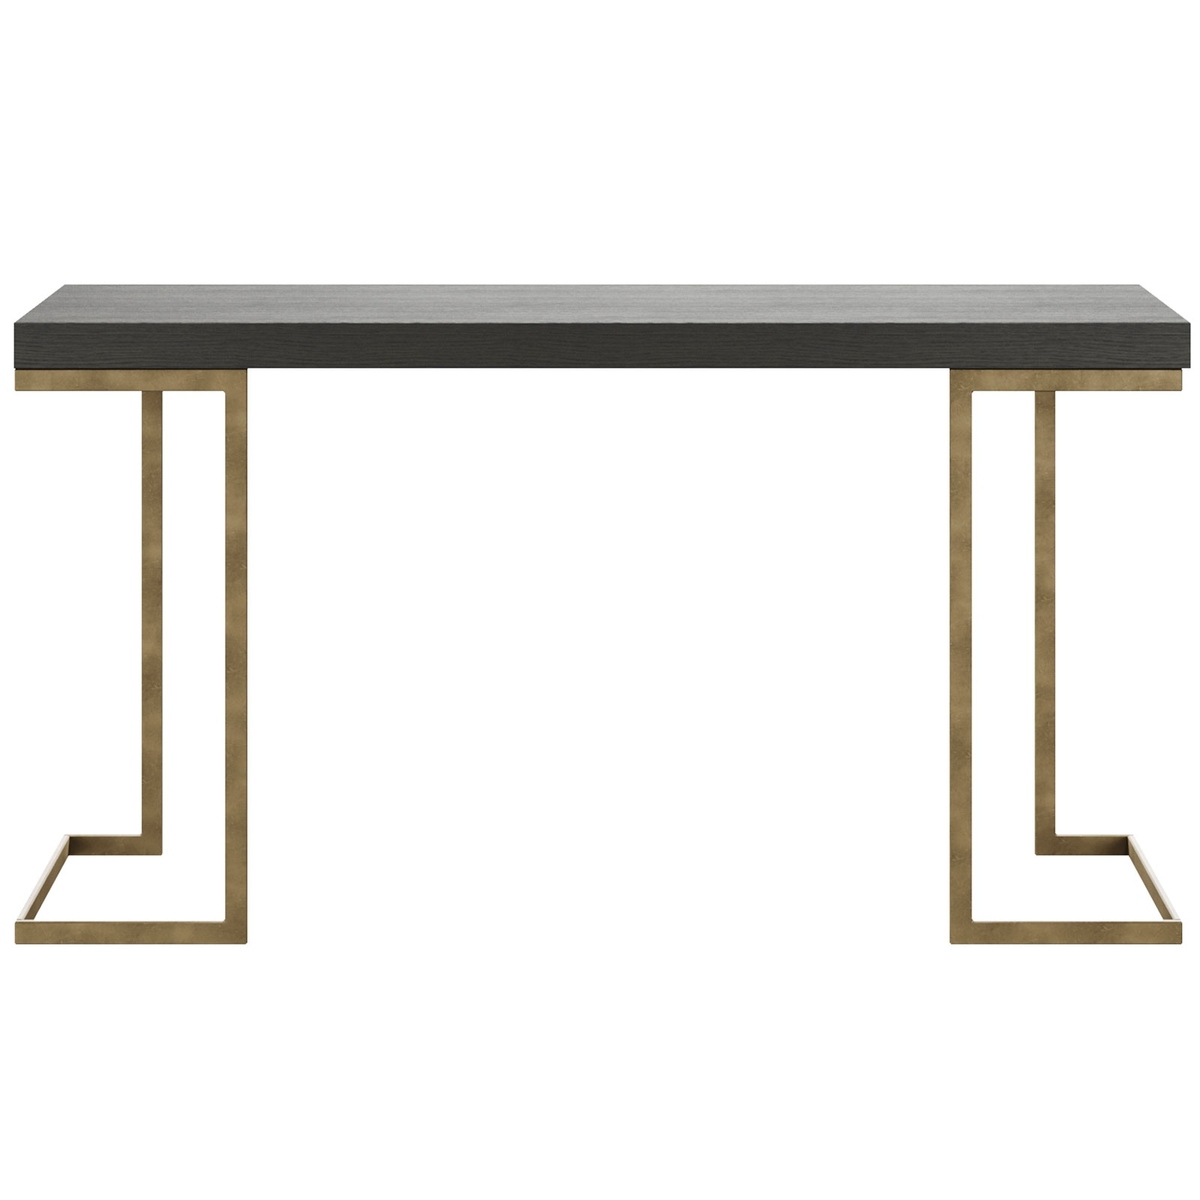 Atkinson Console Table